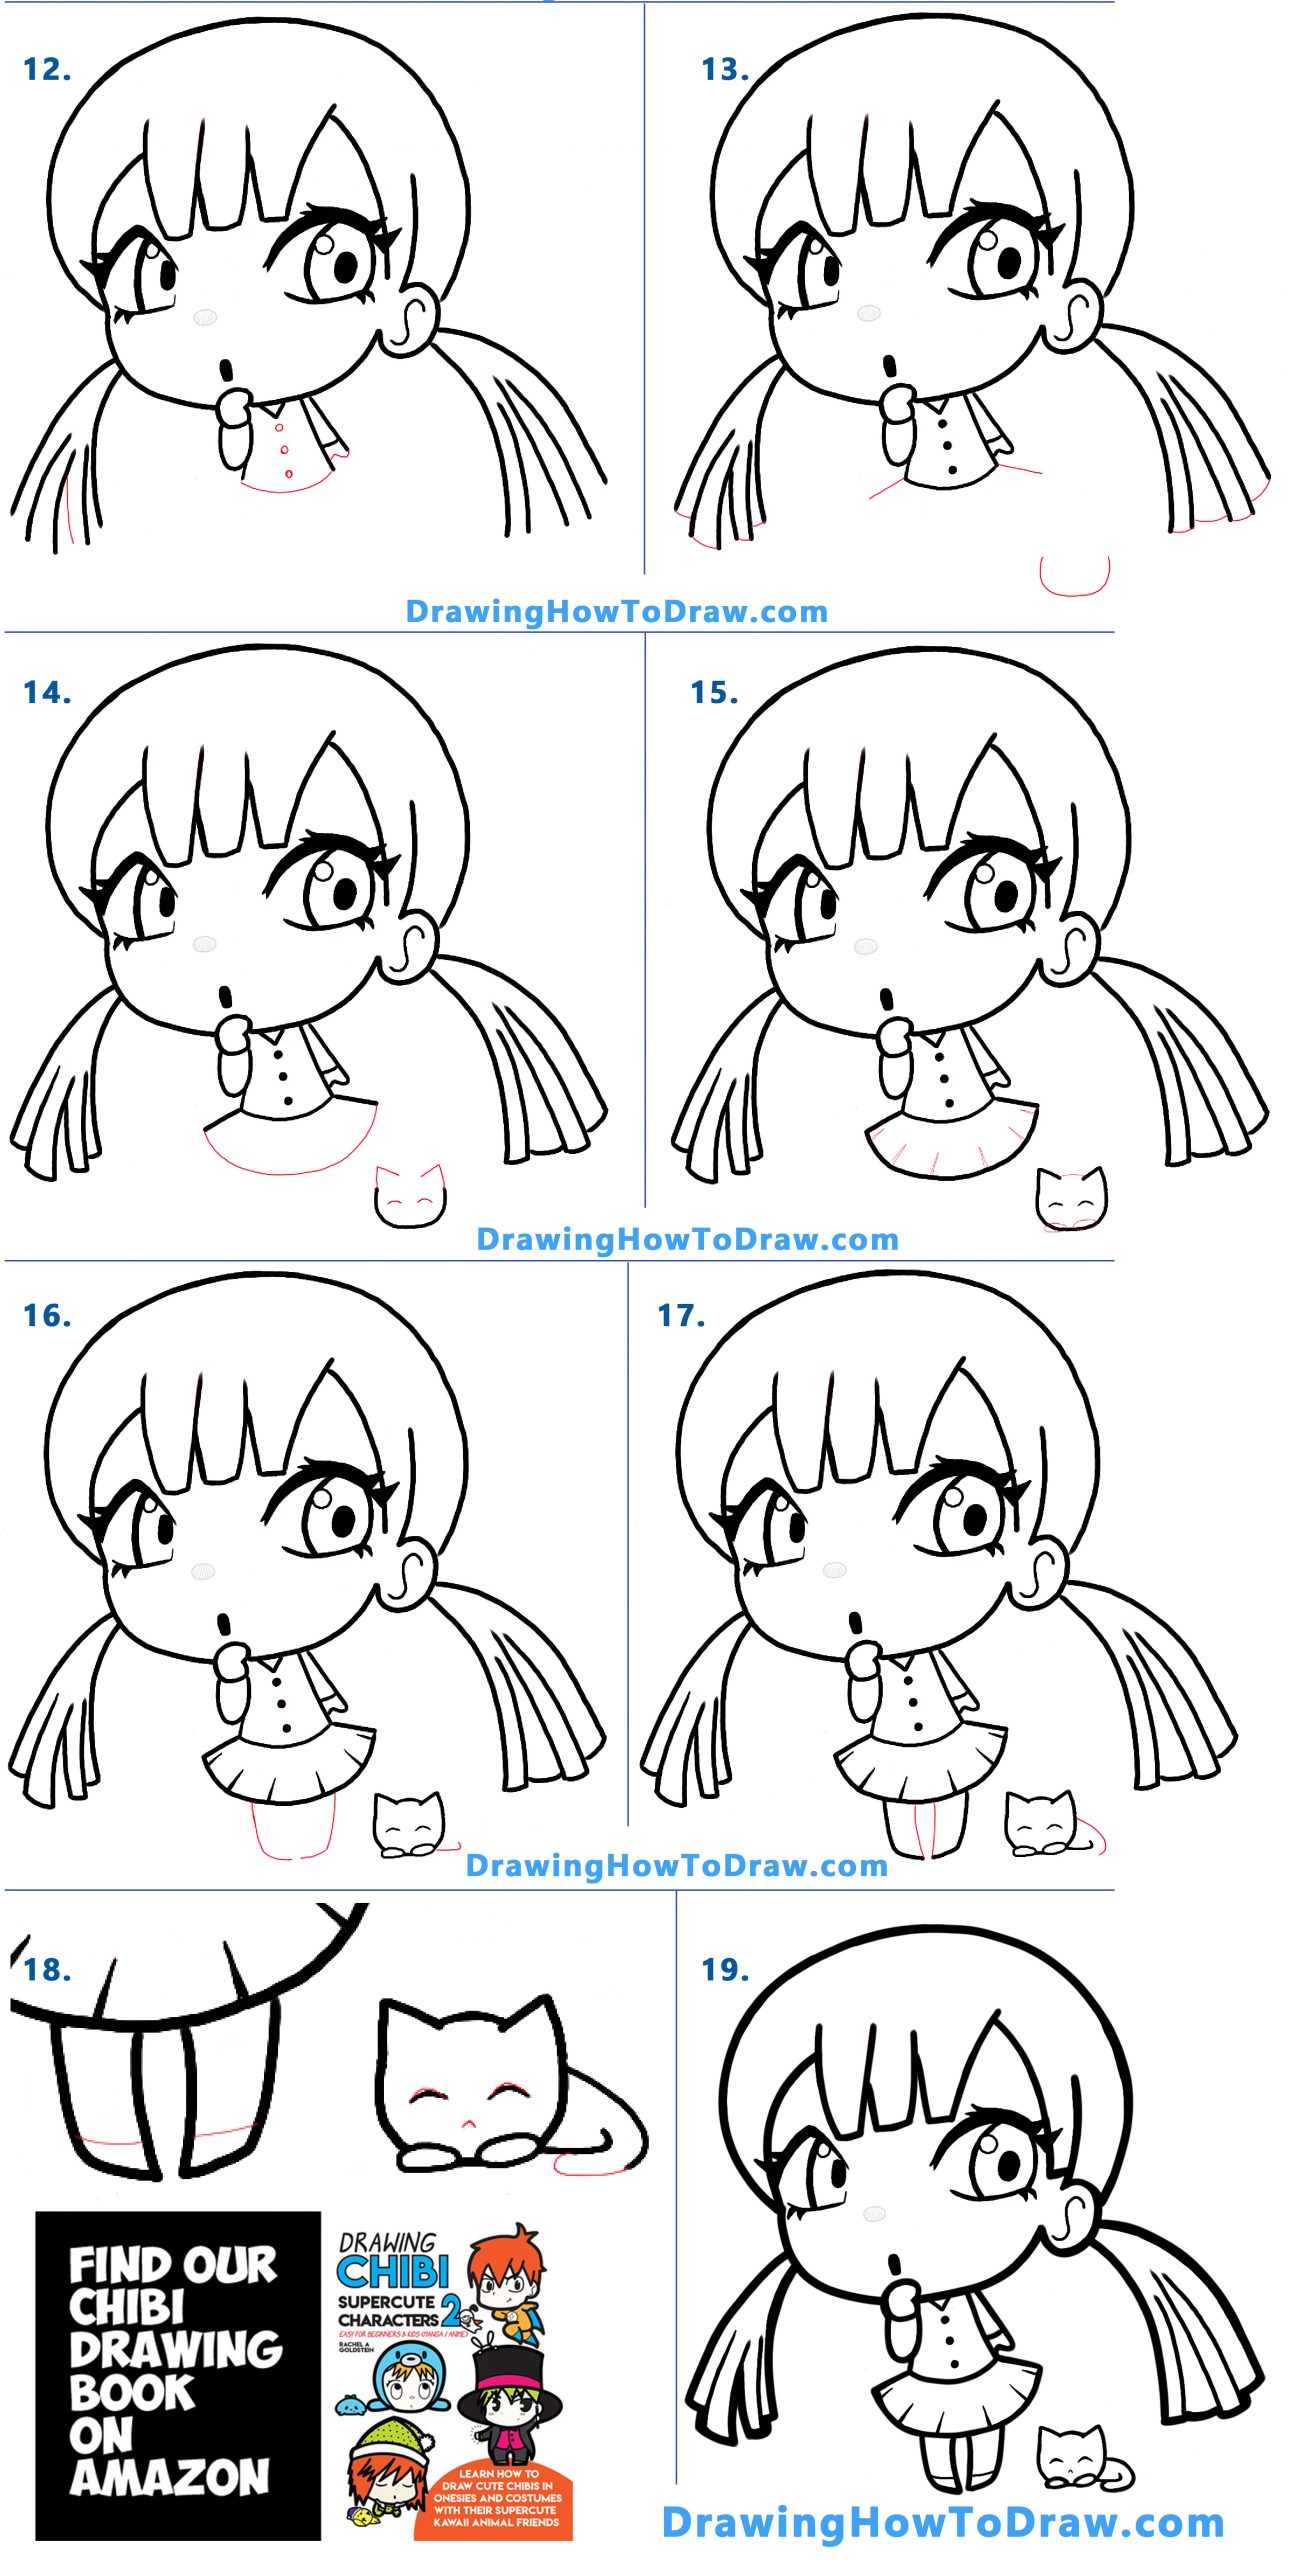 How To Draw A Cute Manga Anime Chibi Girl With Her Kitty Cat Easy Step By Step Drawing Lesson How To Draw Step By Step Drawing Tutorials